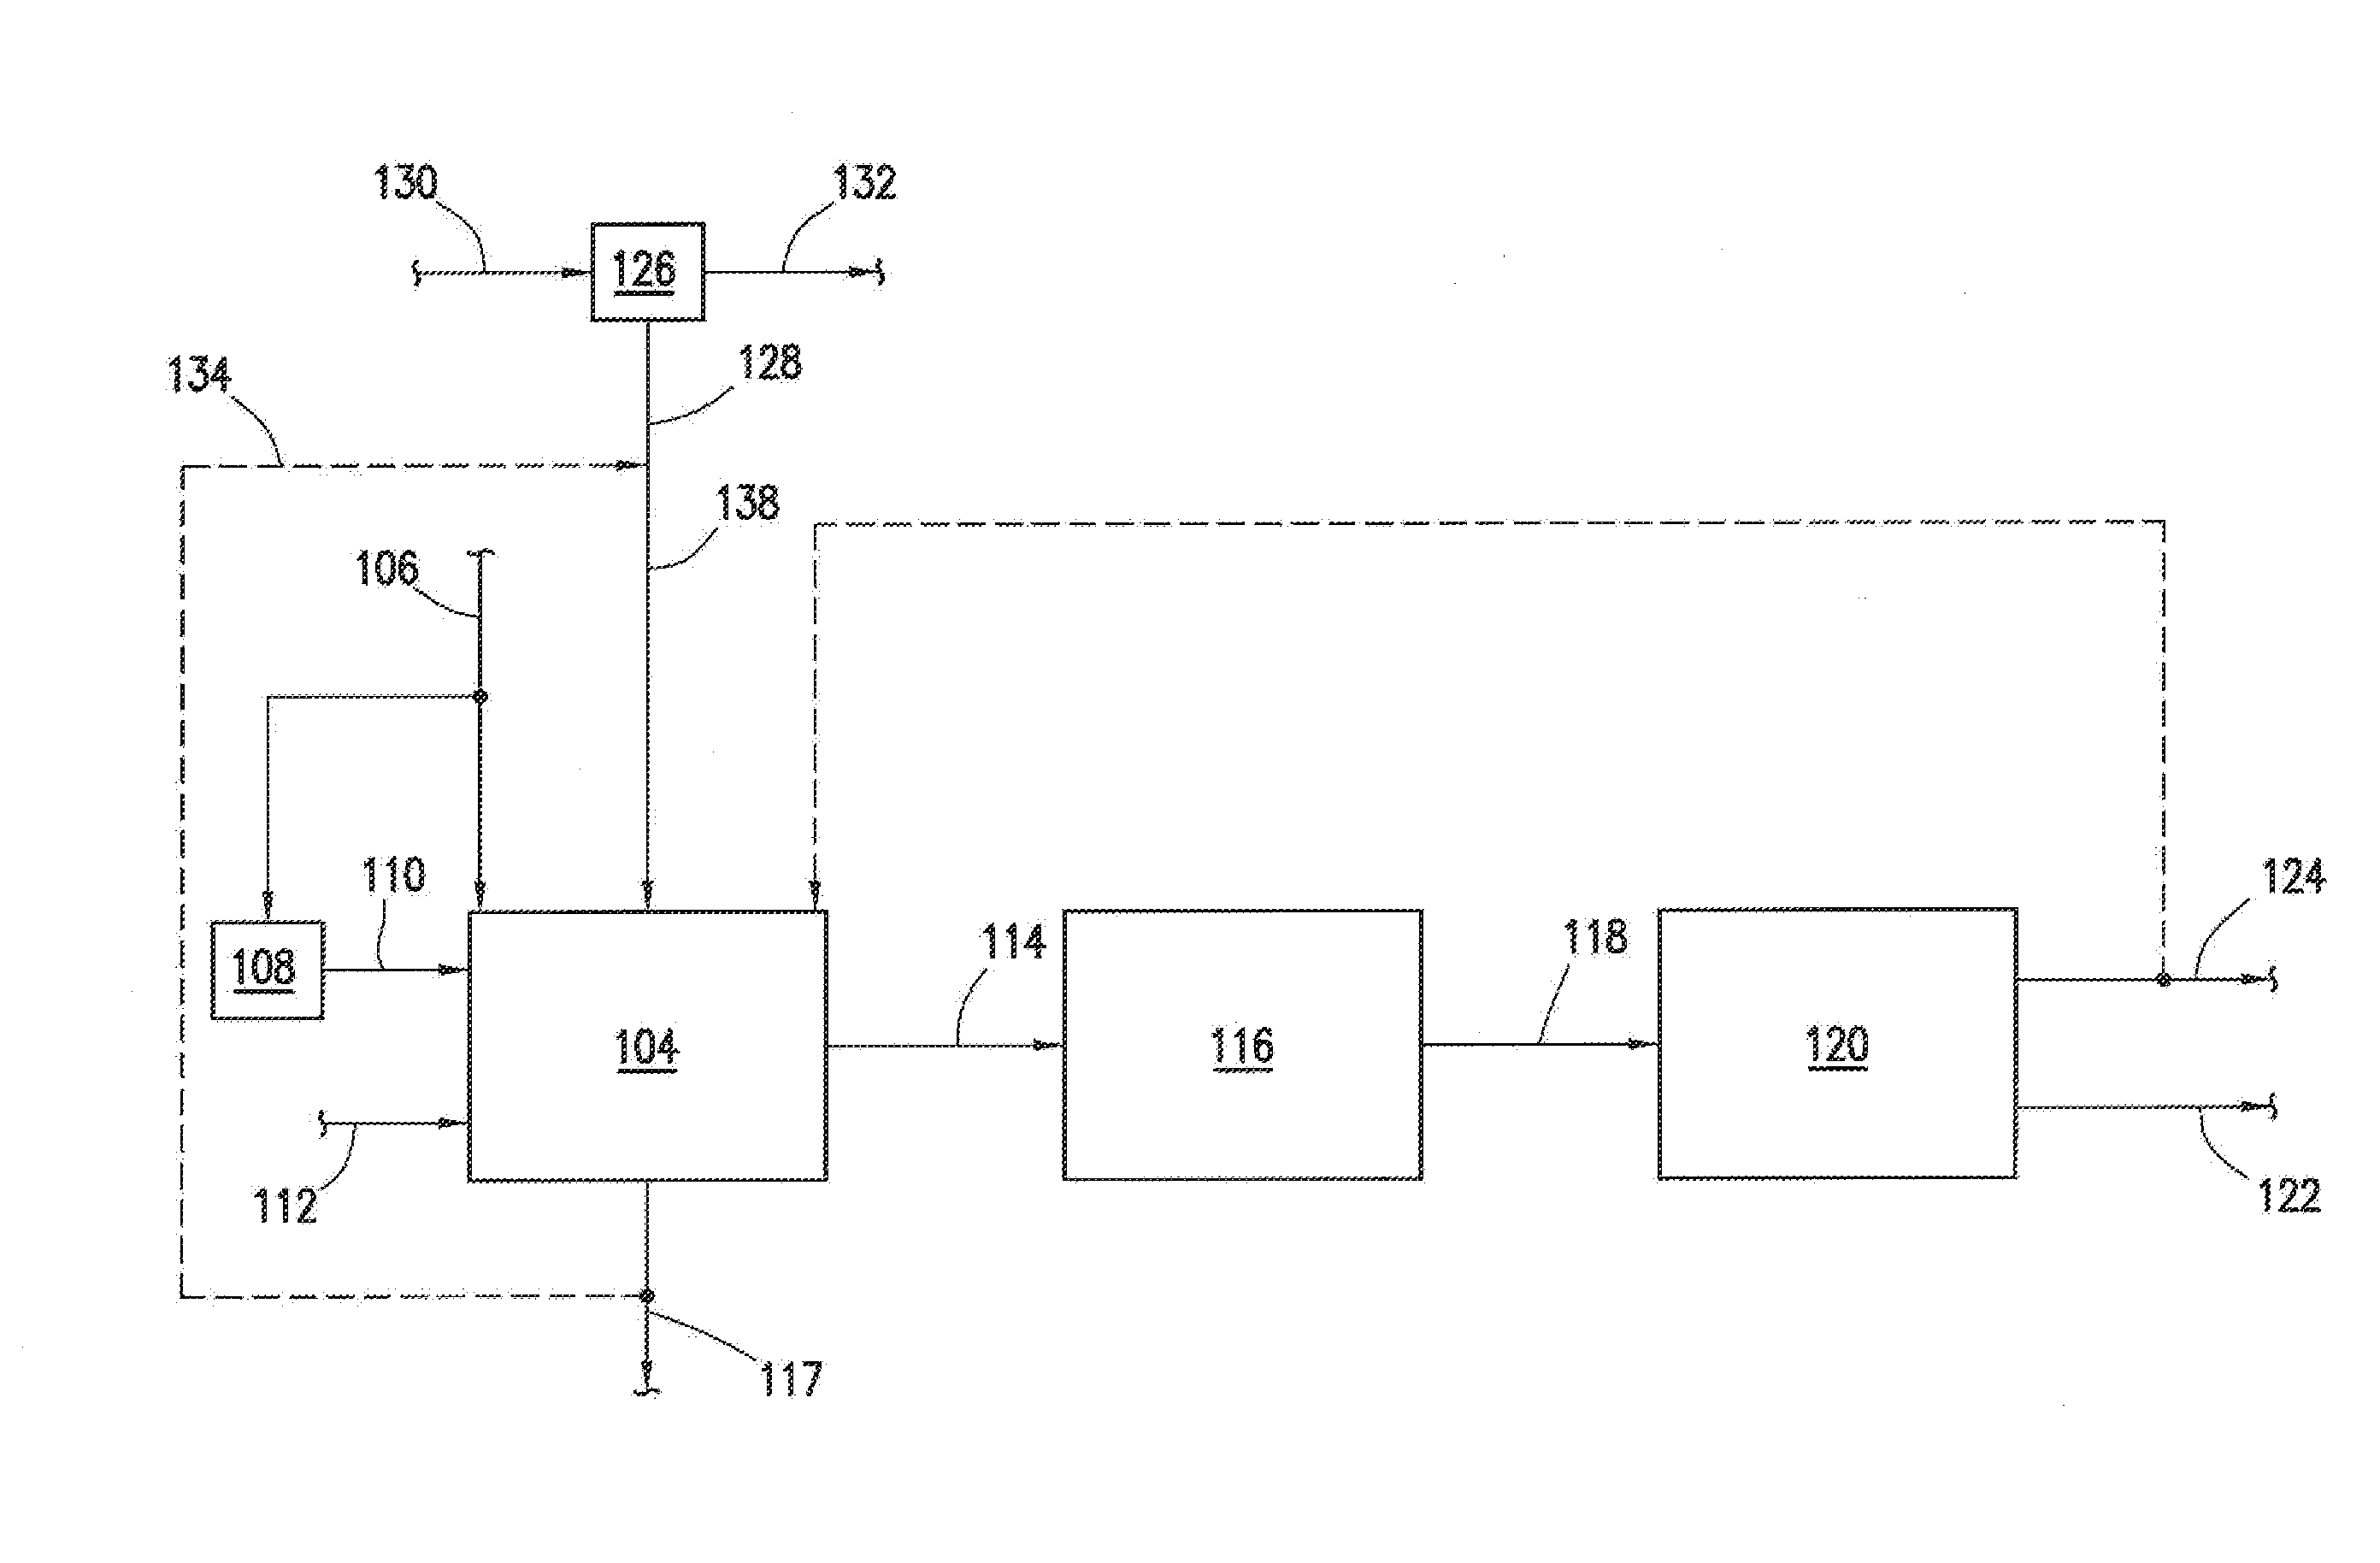 Process for enabling carbon-capture from existing combustion processes